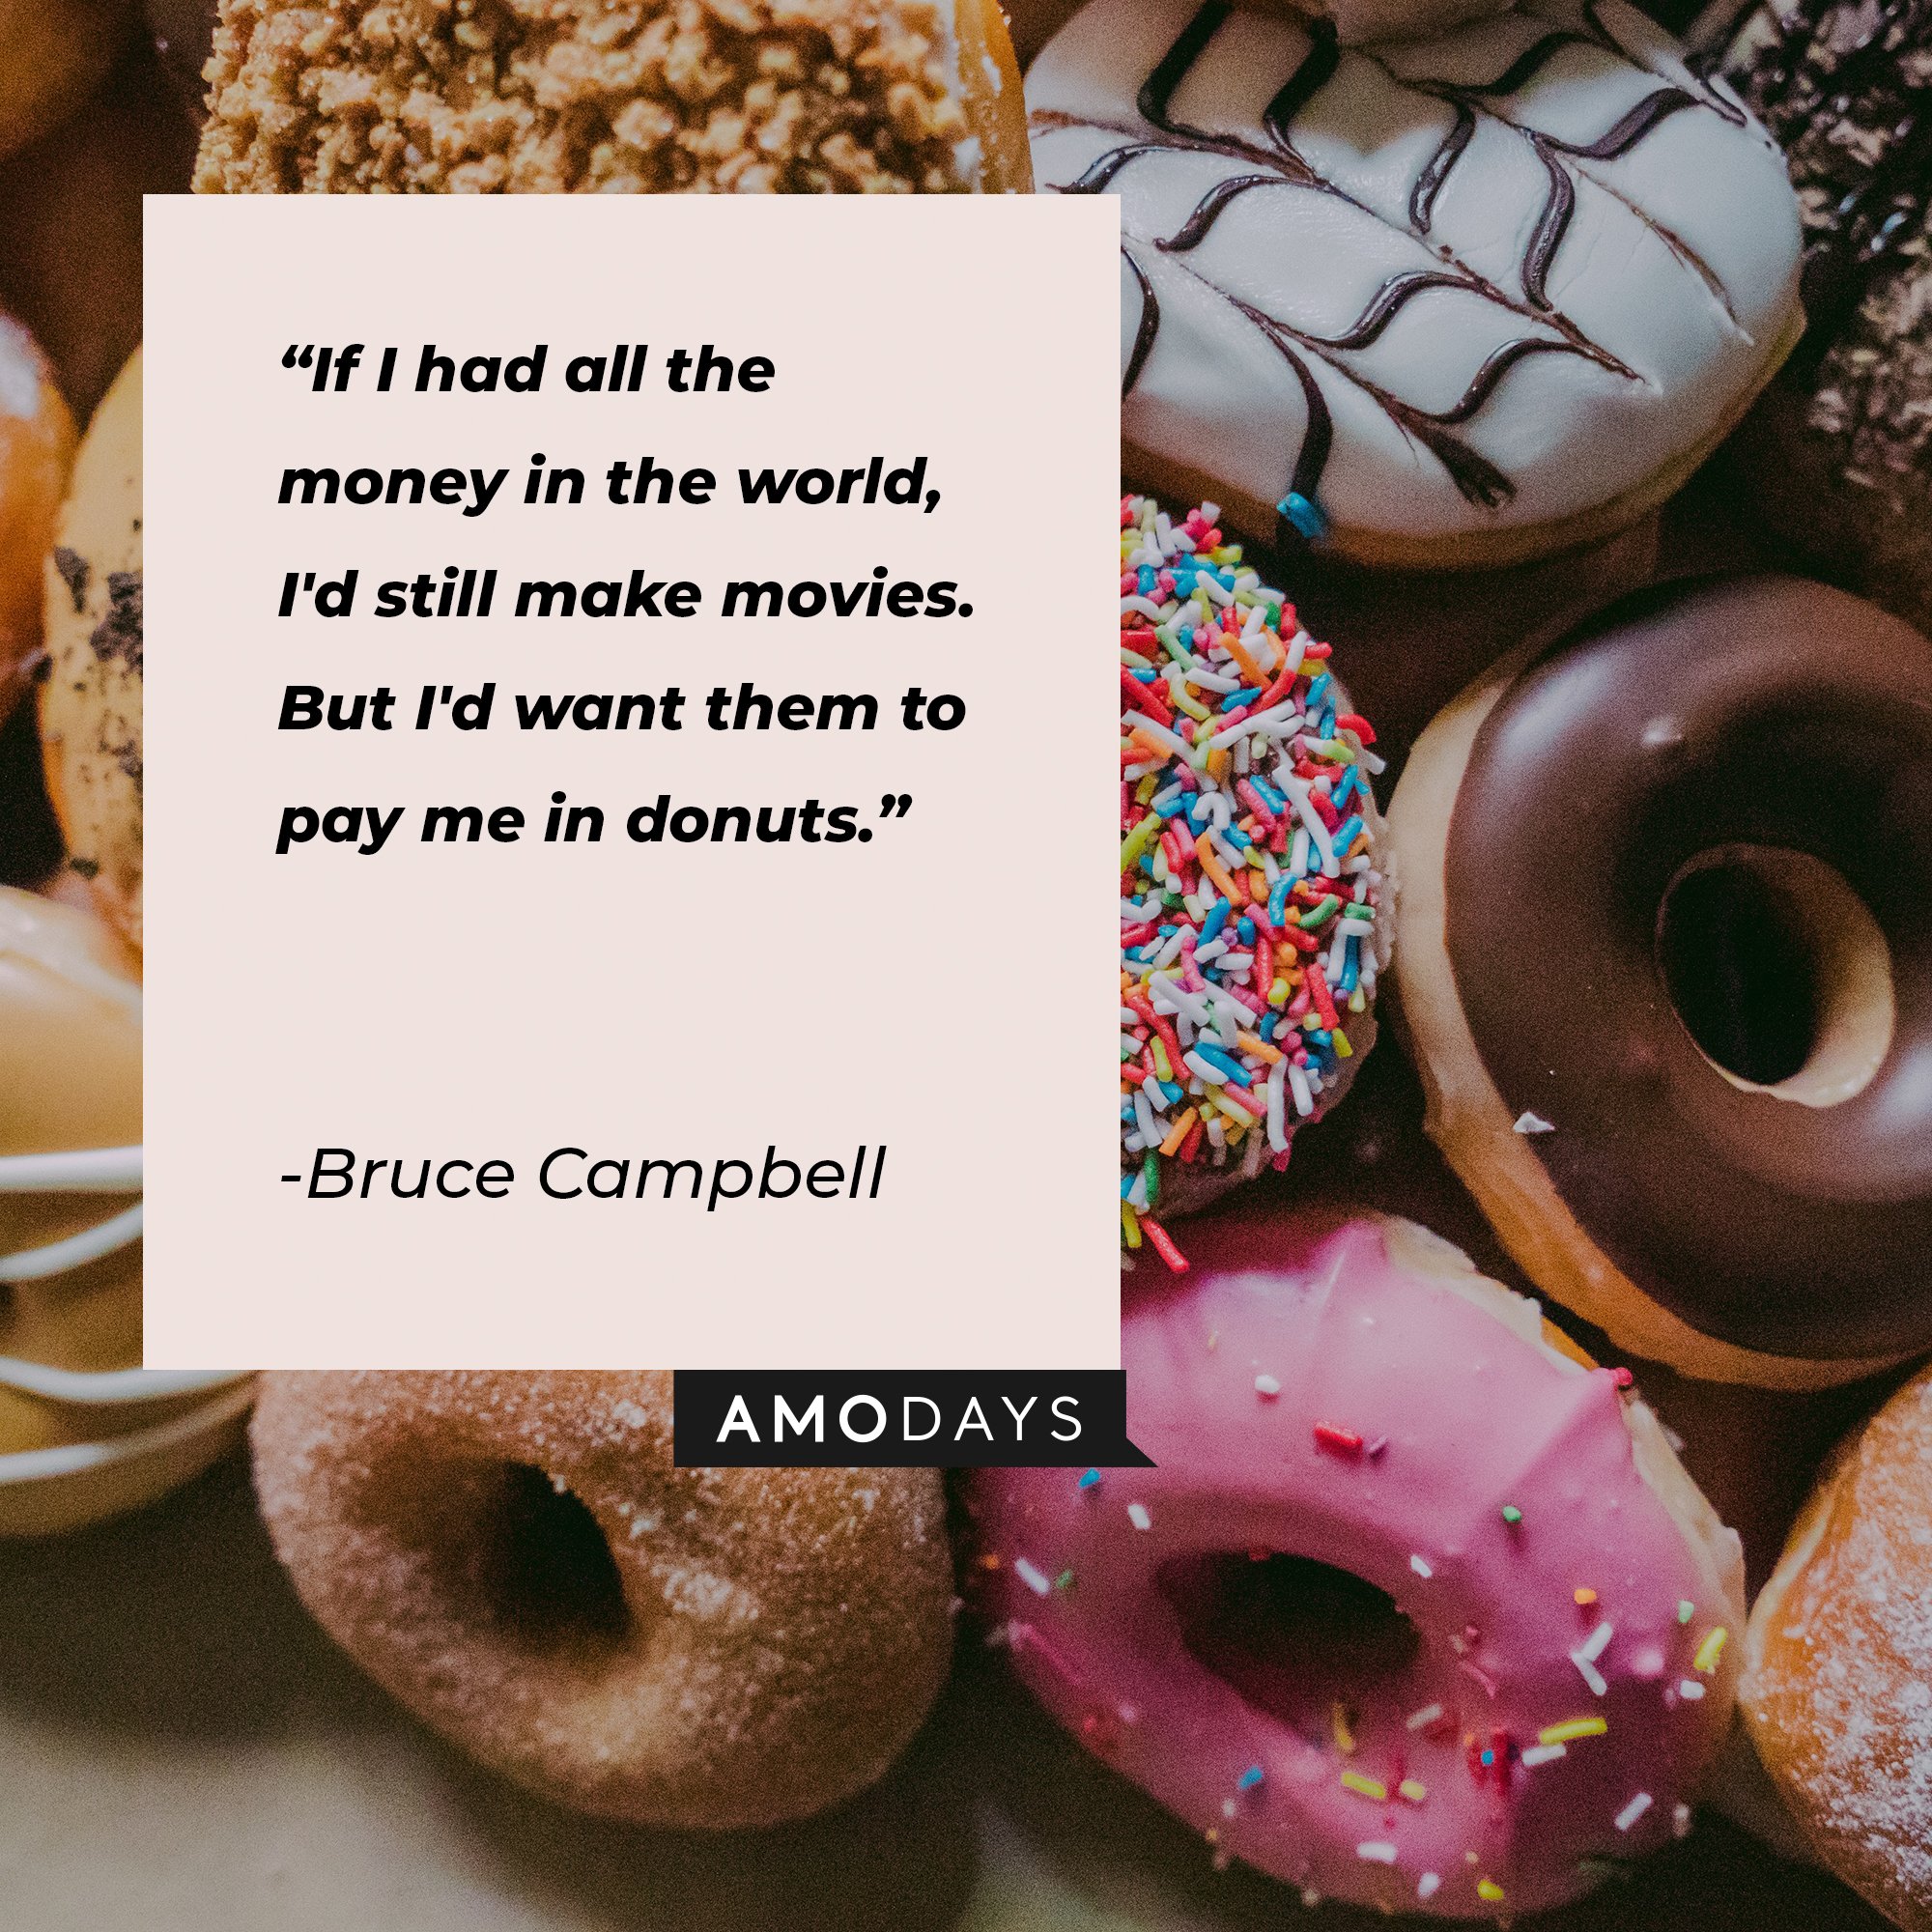 Bruce Campbell's quote: "If I had all the money in the world, I'd still make movies. But I'd want them to pay me in donuts." | Image: AmoDays